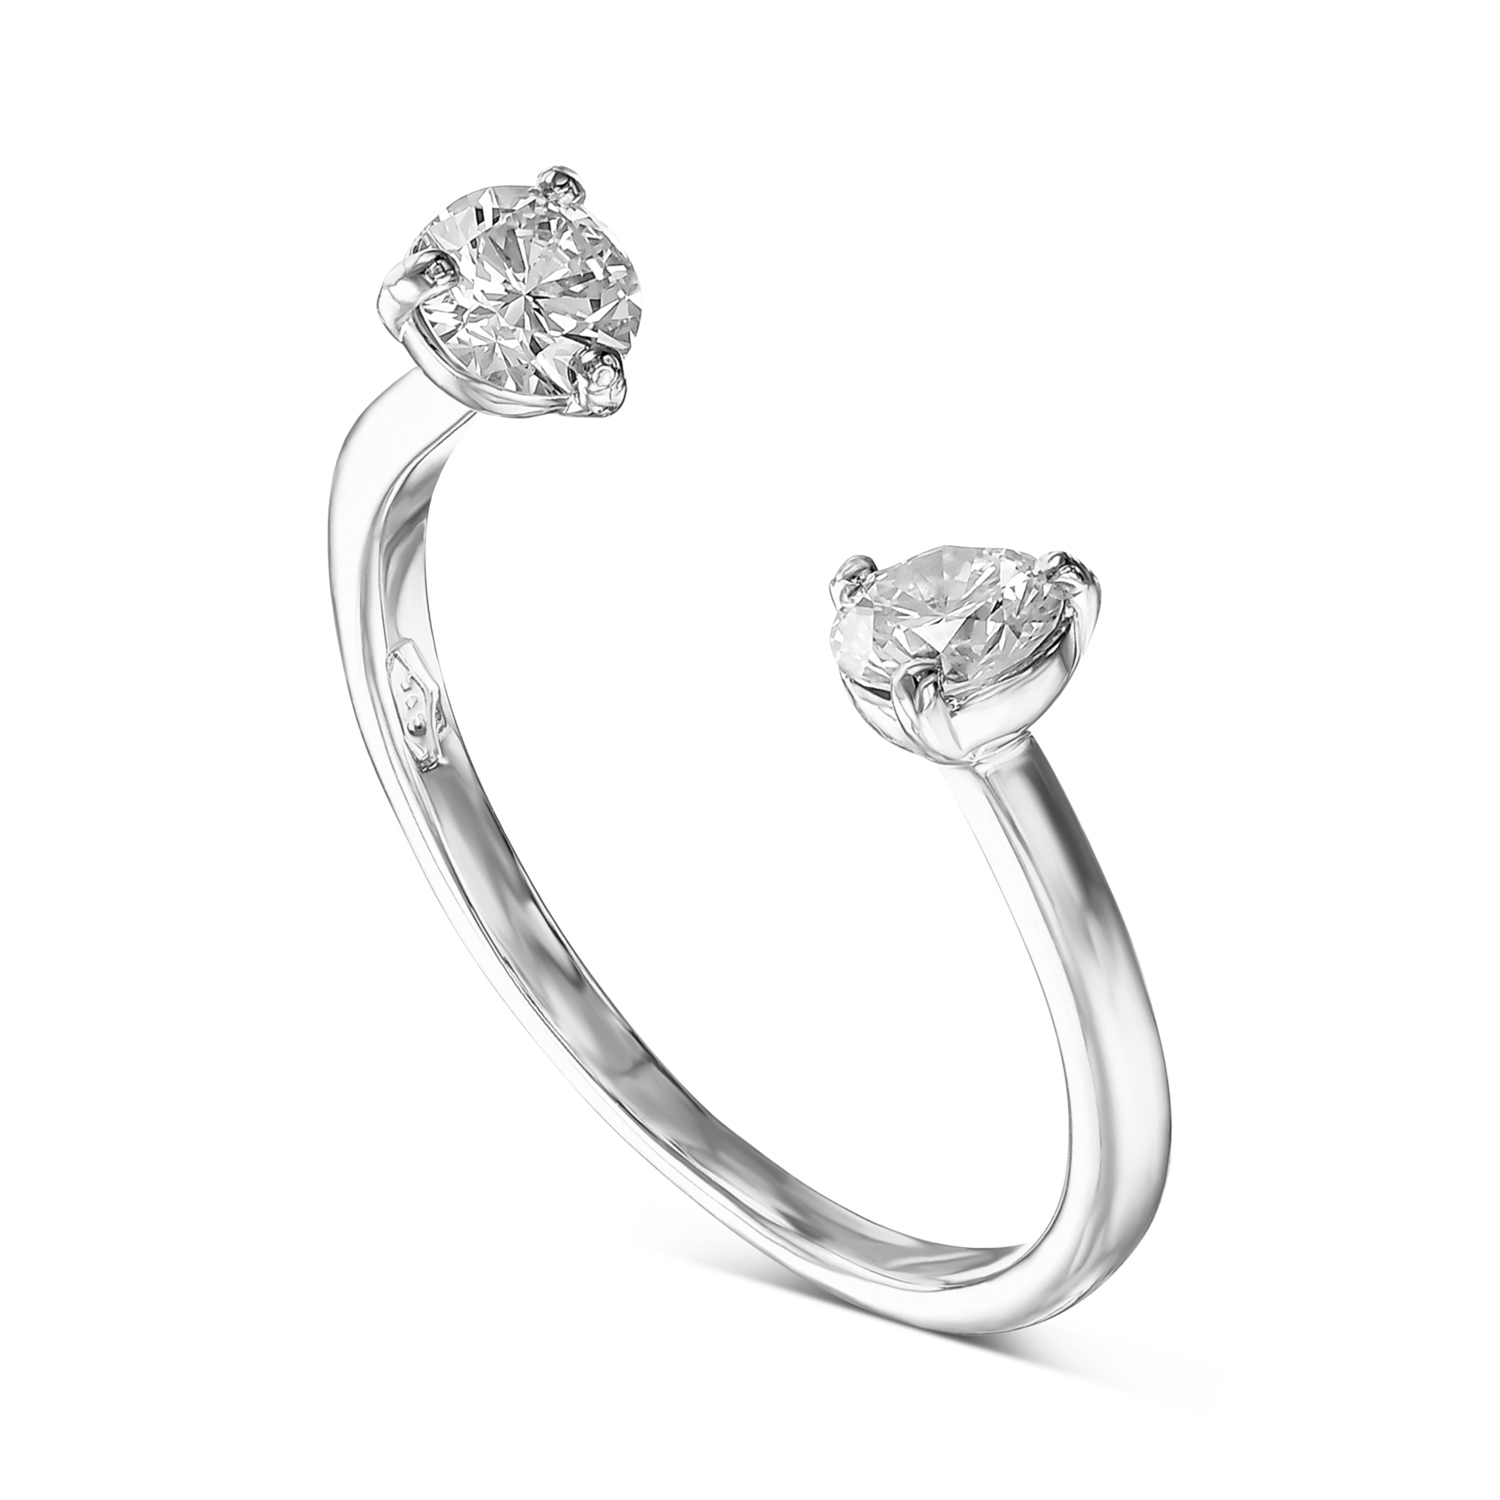 Open Ring With Two Diamonds - Sharlin Fine Jewelry